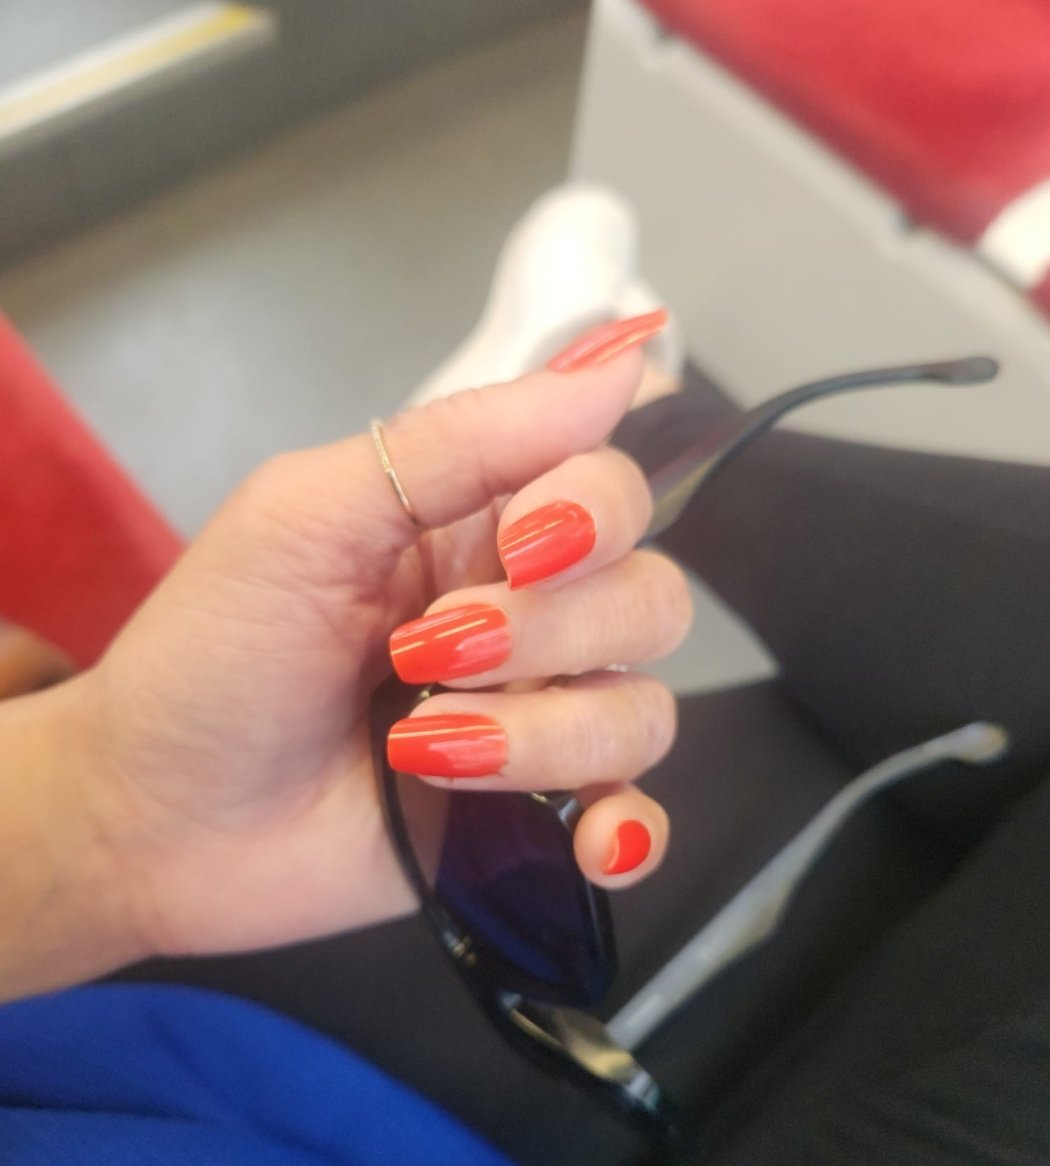 #PressOns yay!! 💅 

#girlstuff #nails #rednails #red #fakenails #firsttime